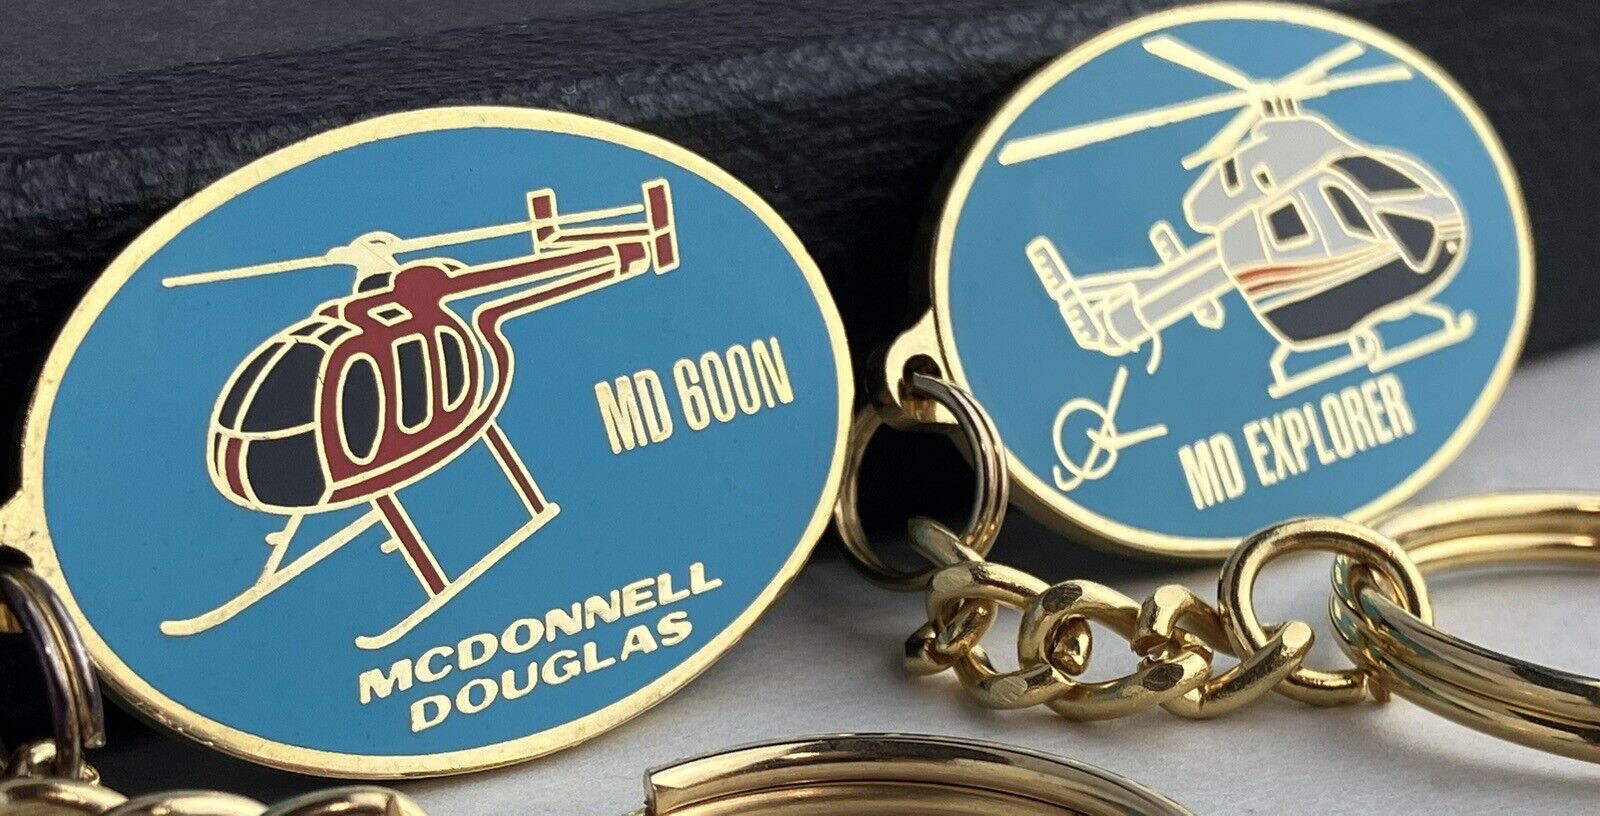 Lot Of 2 Vntg Blue MD 600N, Explorer Helicopter Keychain Aviation Aircraft 1980s